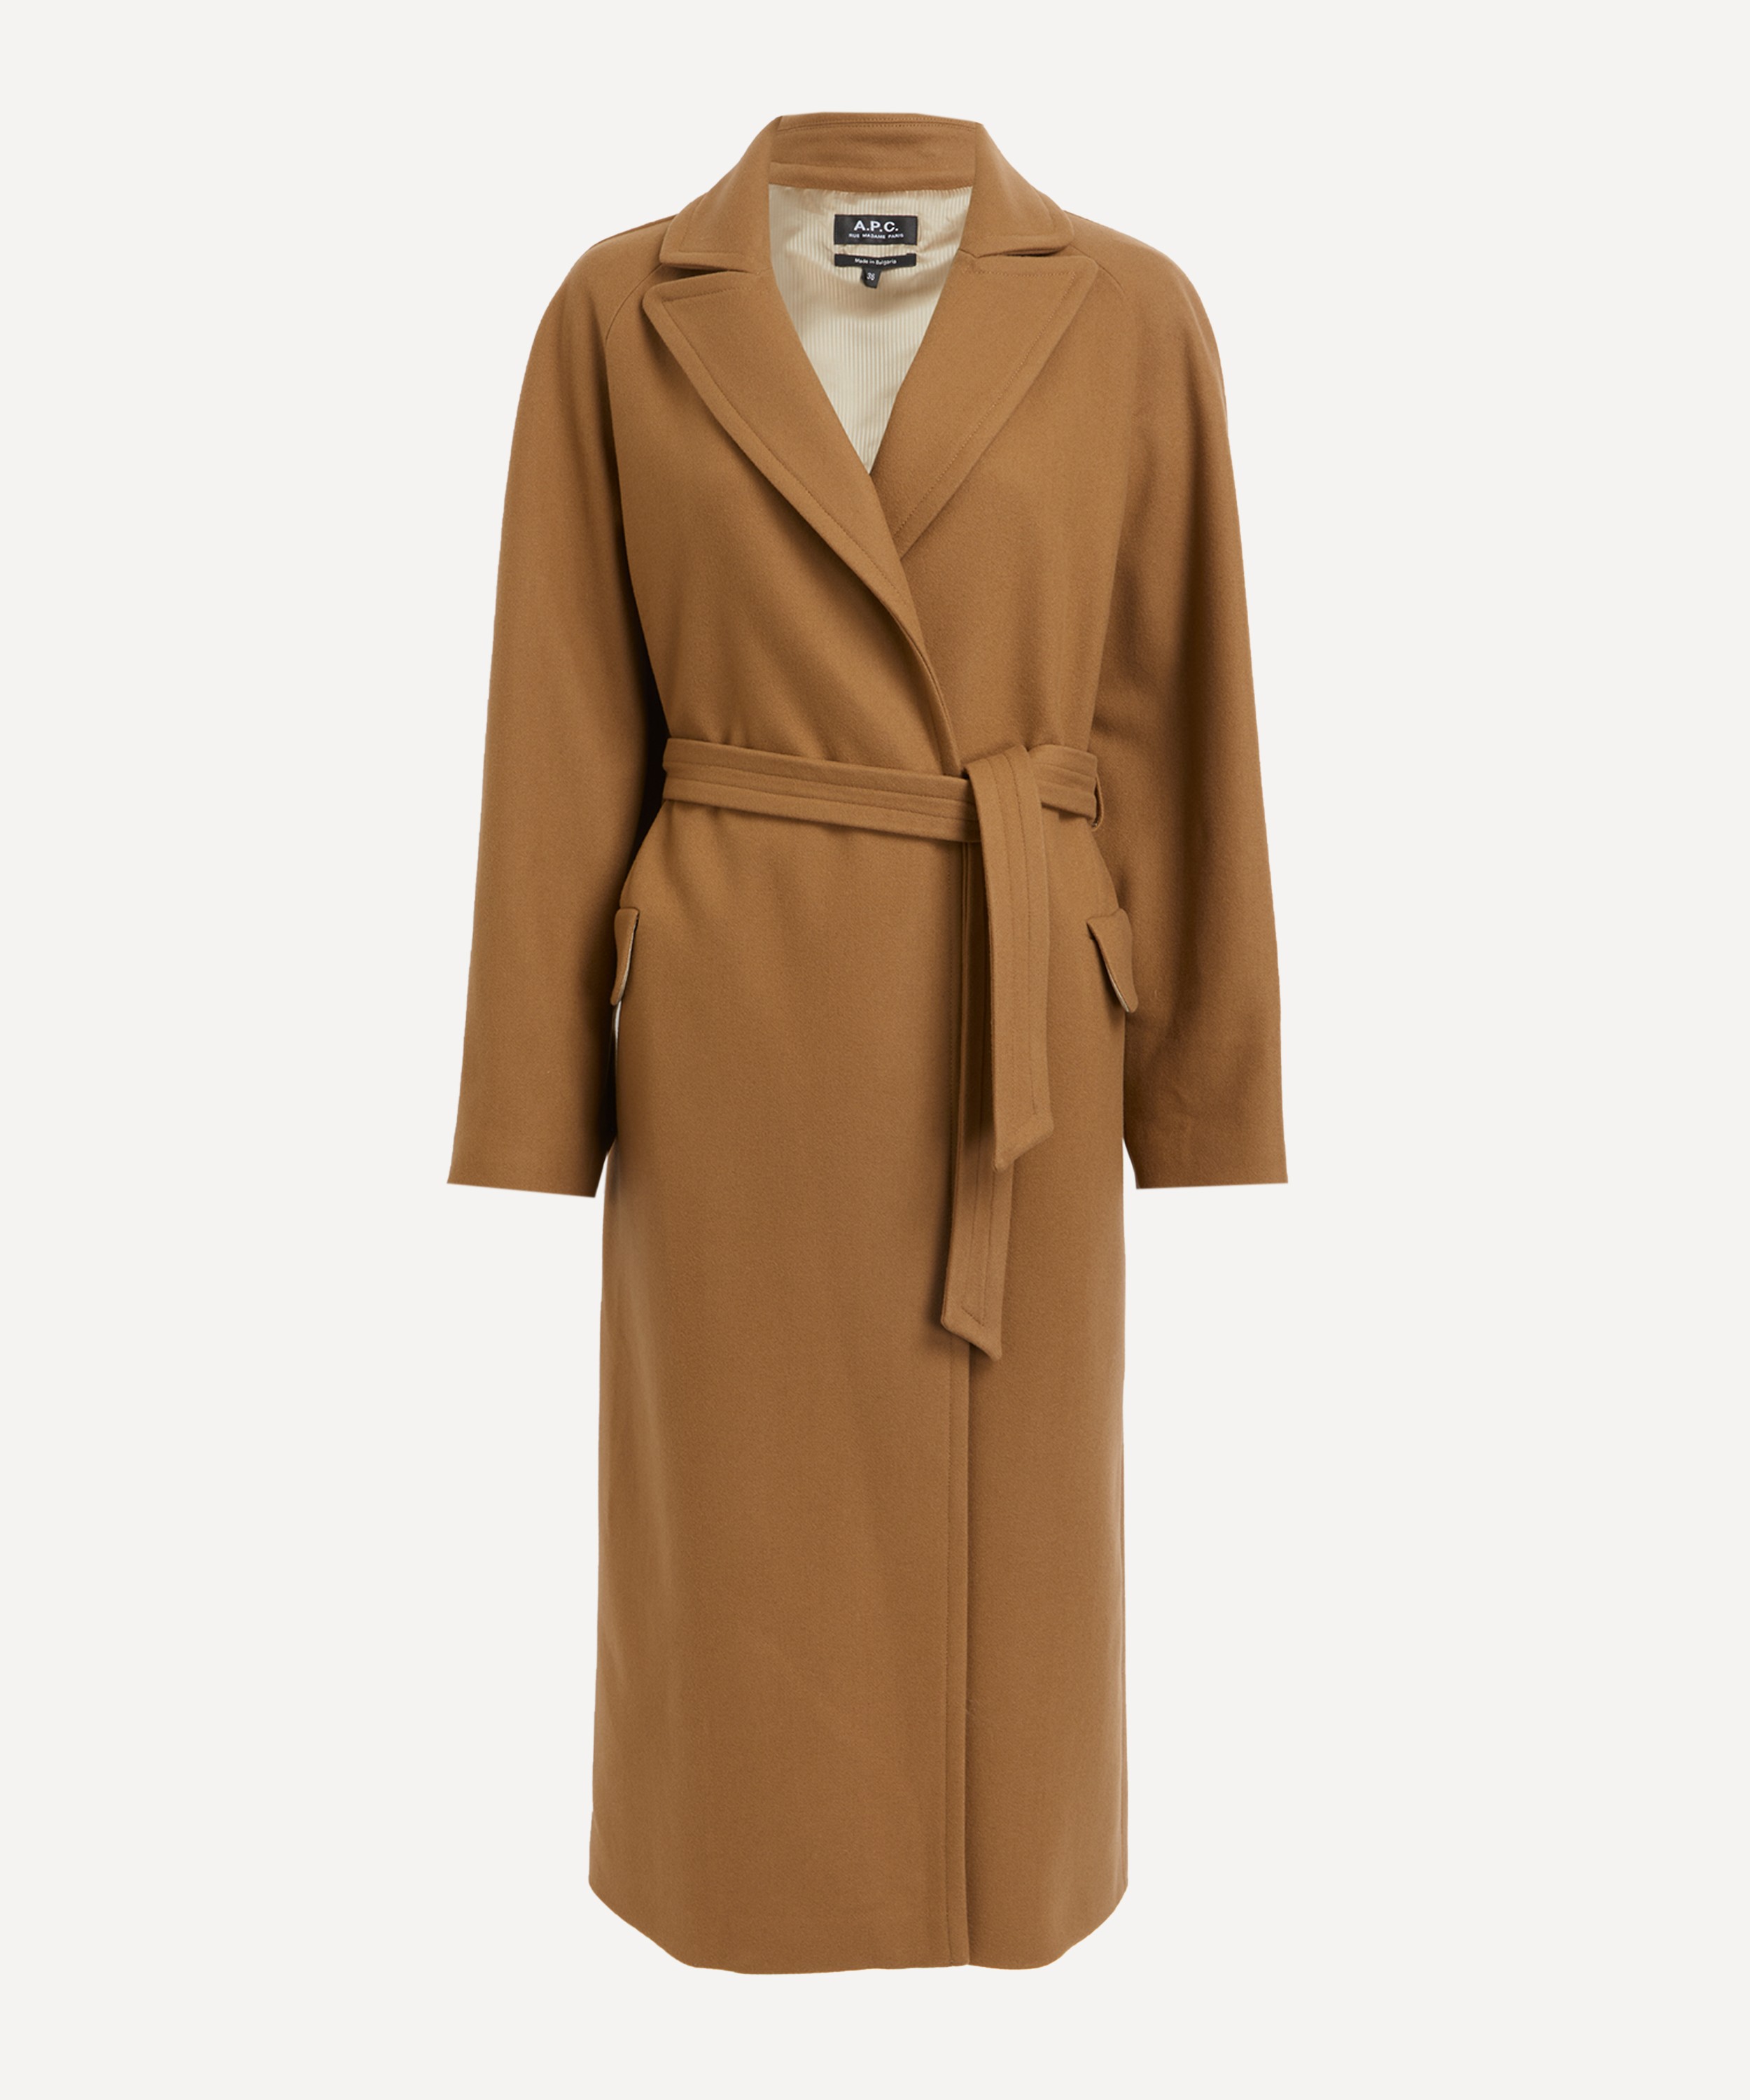 A.P.C. - Florence Wool and Cashmere-Blend Coat